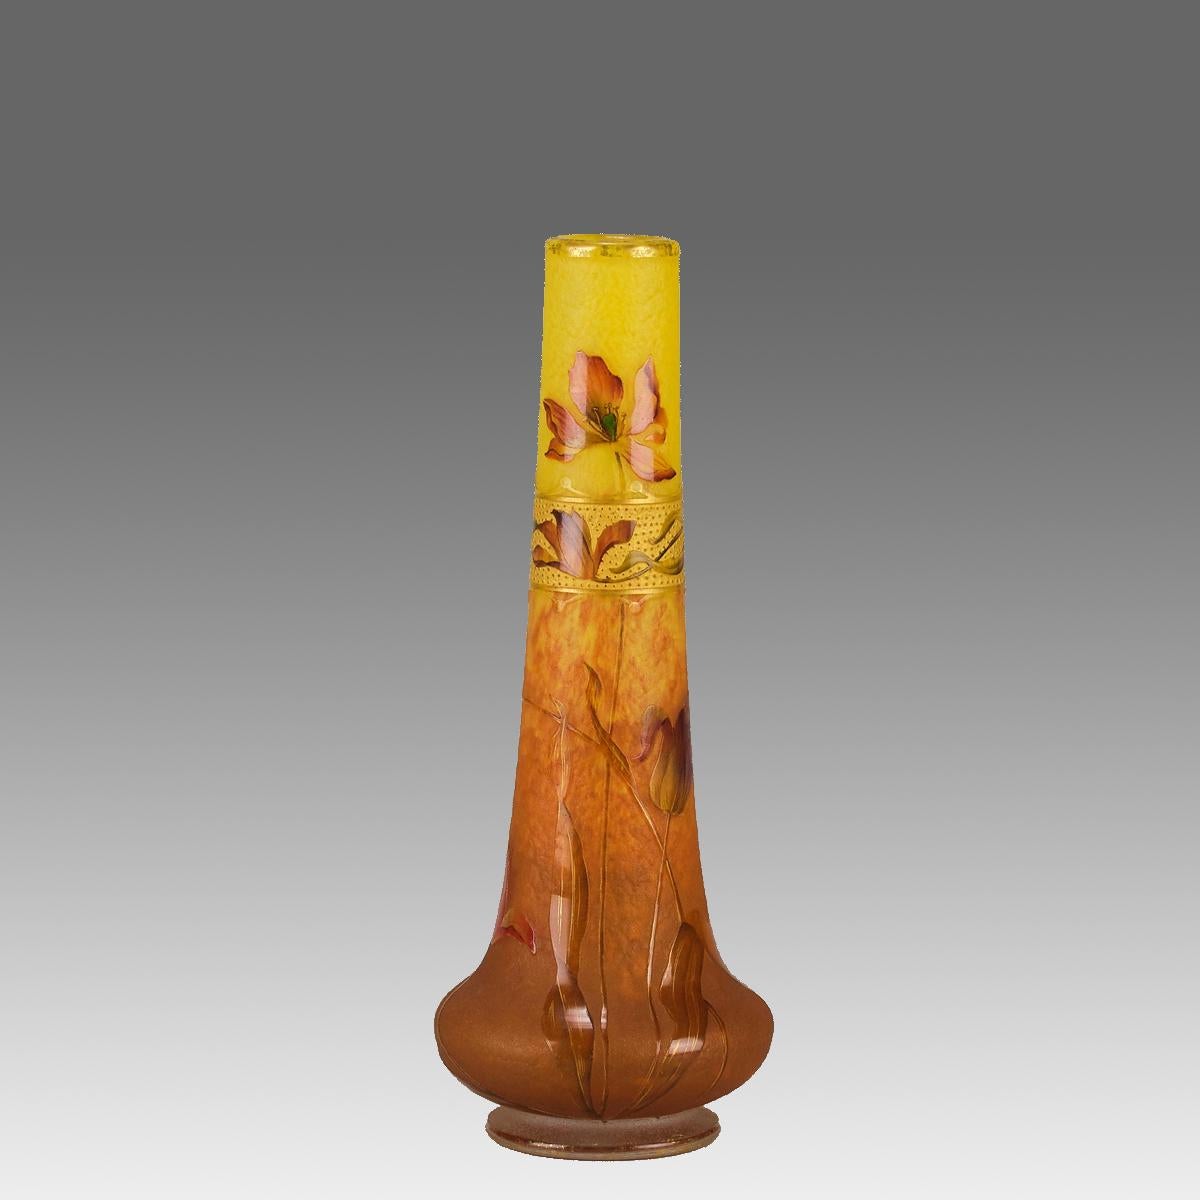 A highly attractive early 20th Century Art Nouveau cameo glass vase etched and enamelled with flowering poppies against a warm yellow to orange field. The design heightened with gilding to the surface to give a dramatic depth of field, exhibiting